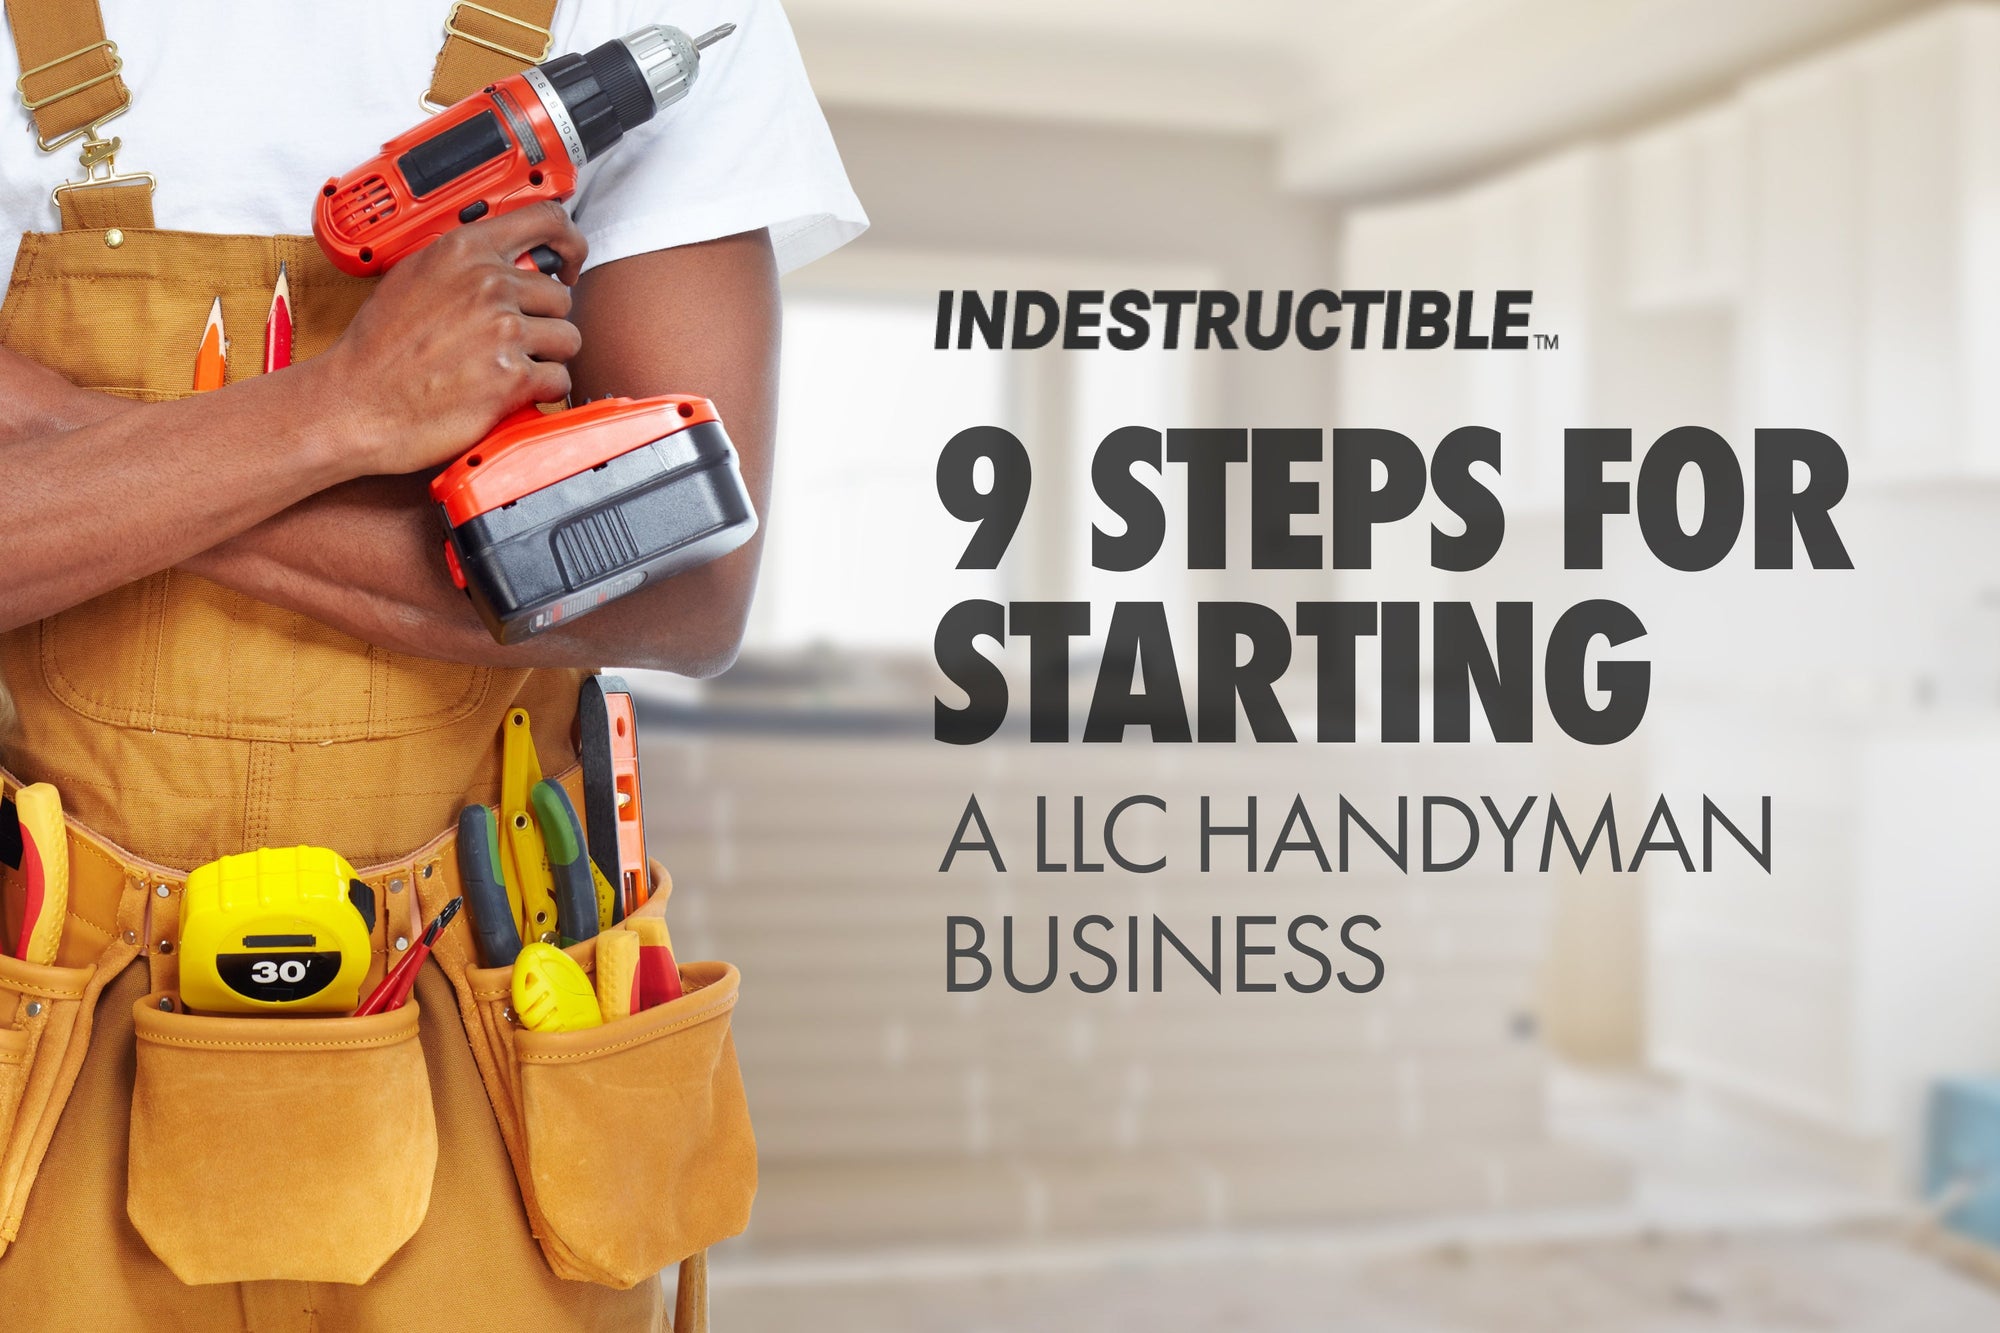 5 Tips for Starting an LLC for a Handyman Business